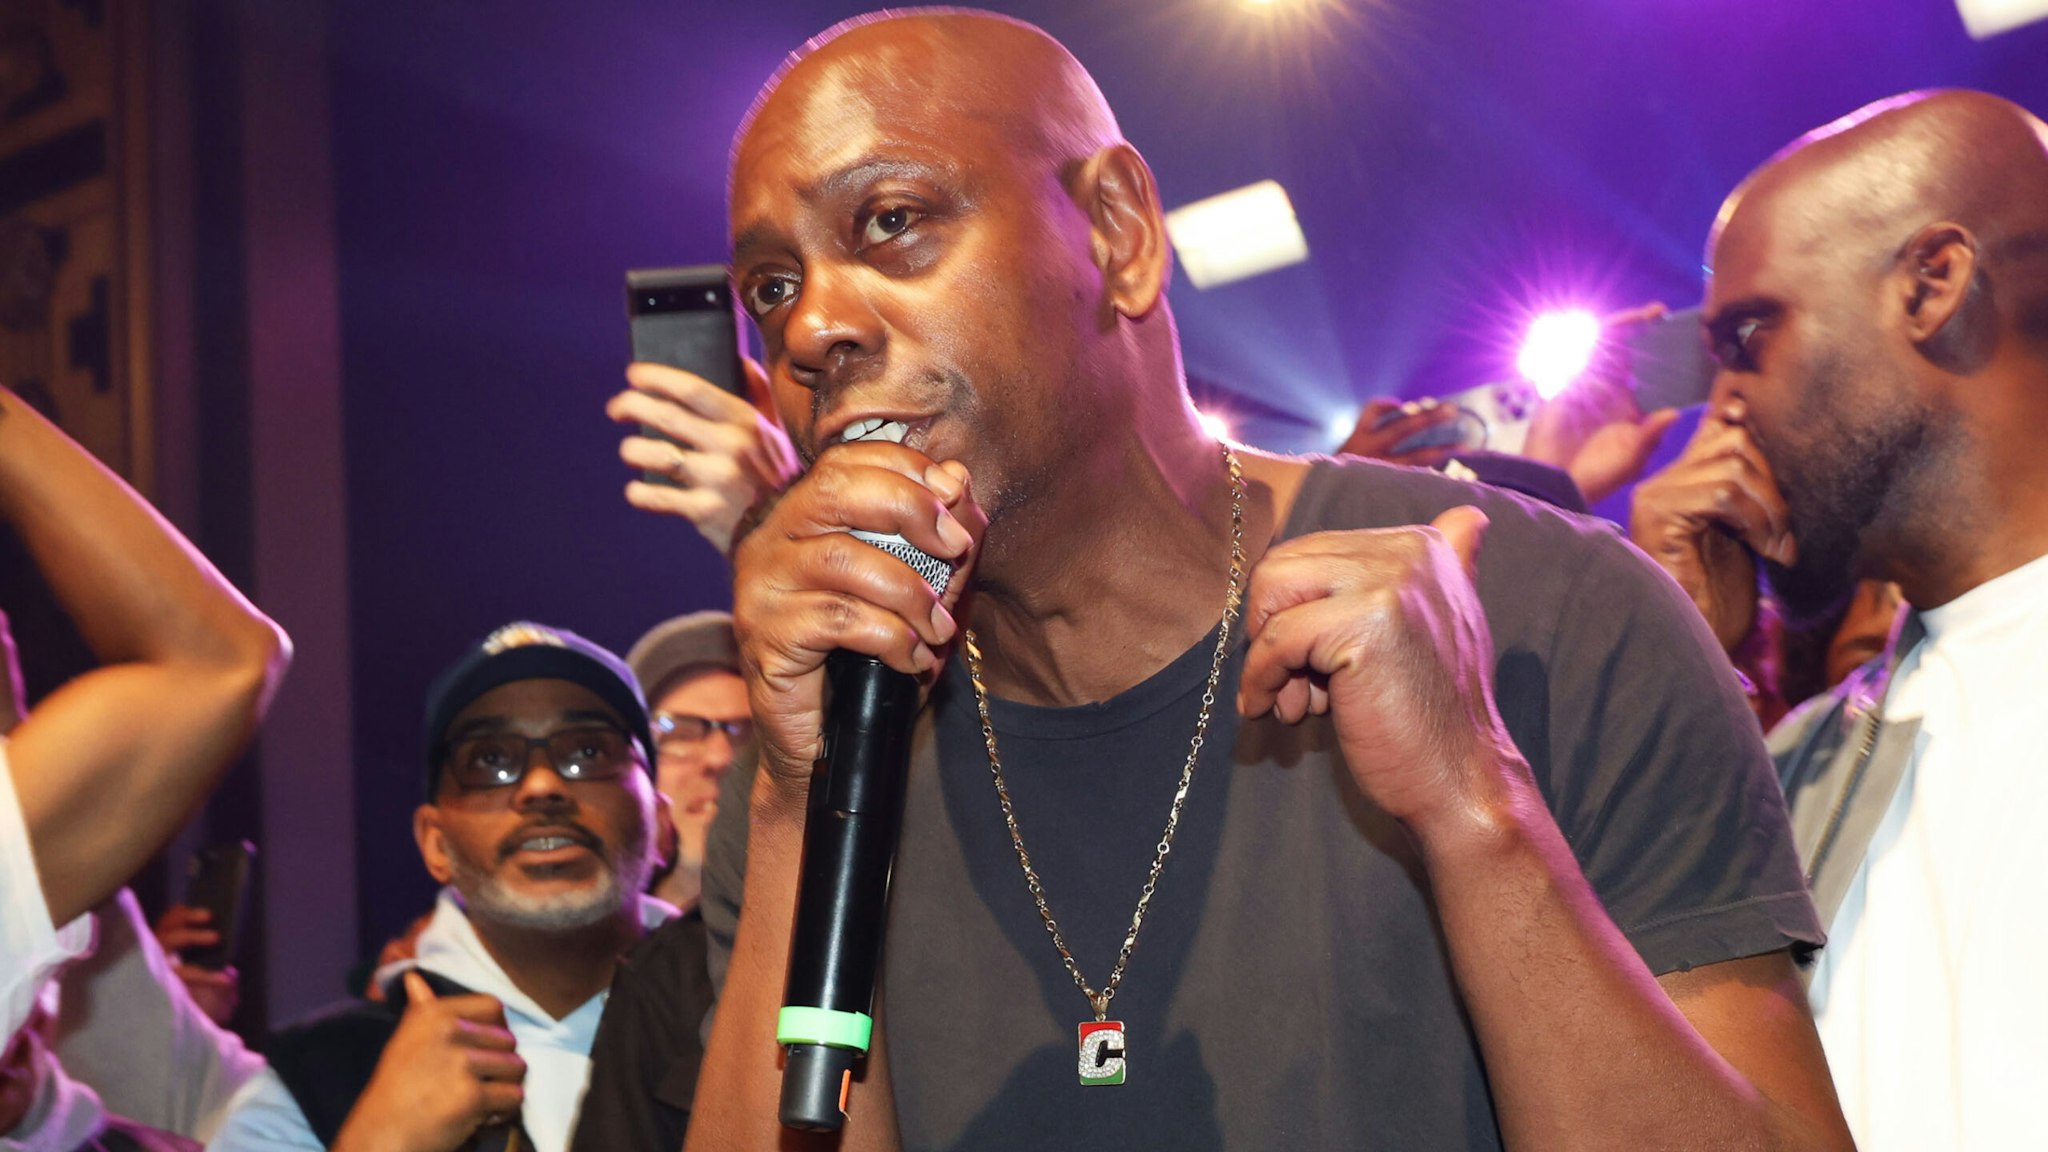 NEW YORK, NEW YORK - MARCH 02: Dave Chappelle speaks onstage at De La Soul’s The DA.I.S.Y. Experience, produced in conjunction with Amazon Music, at Webster Hall on March 02, 2023 in New York City.